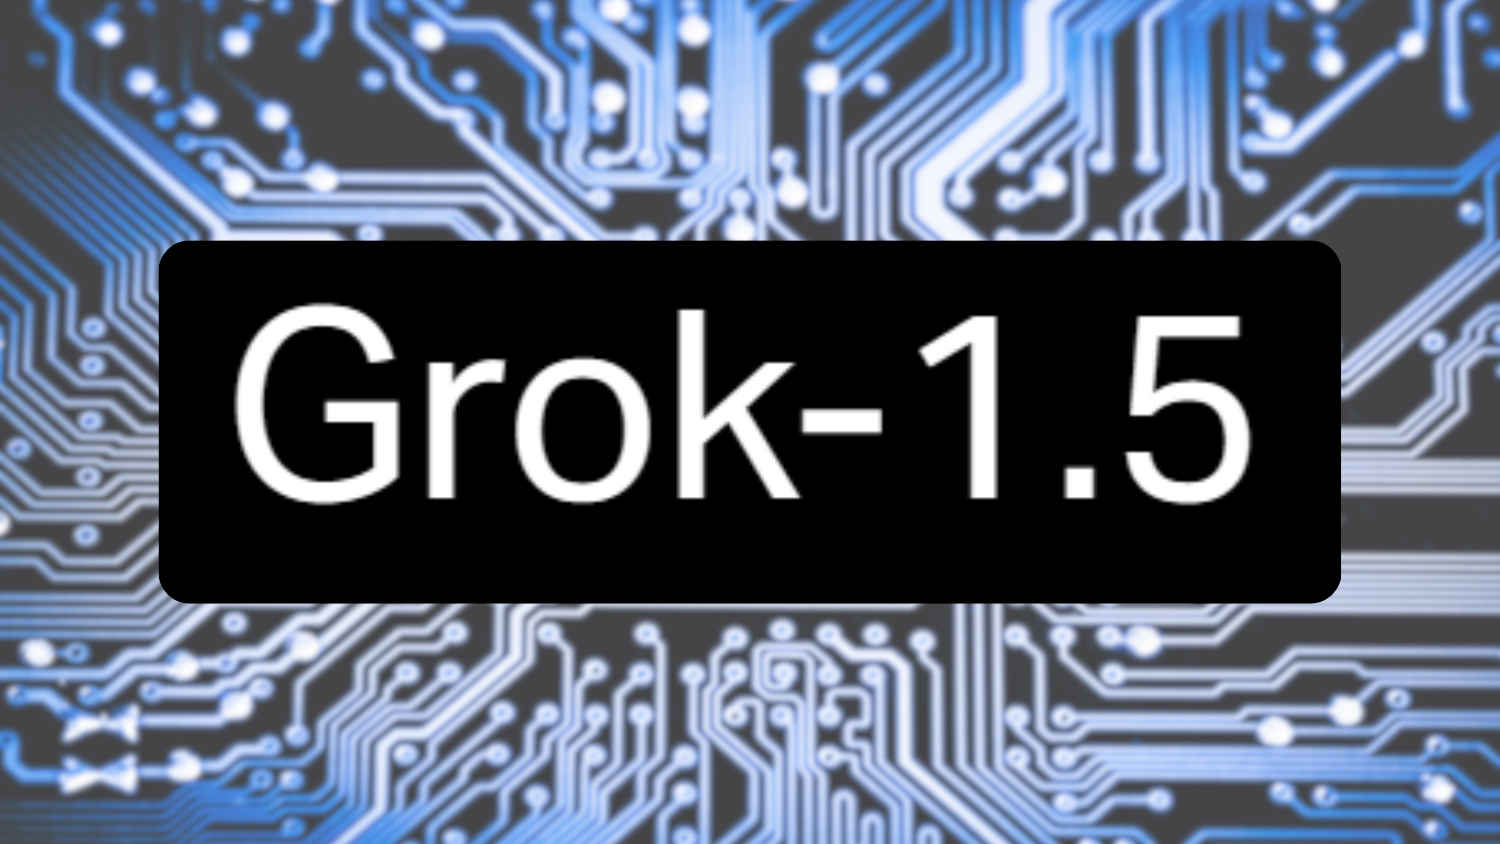 xAI introduces Grok-1.5V AI model with image processing capabilities: Check details